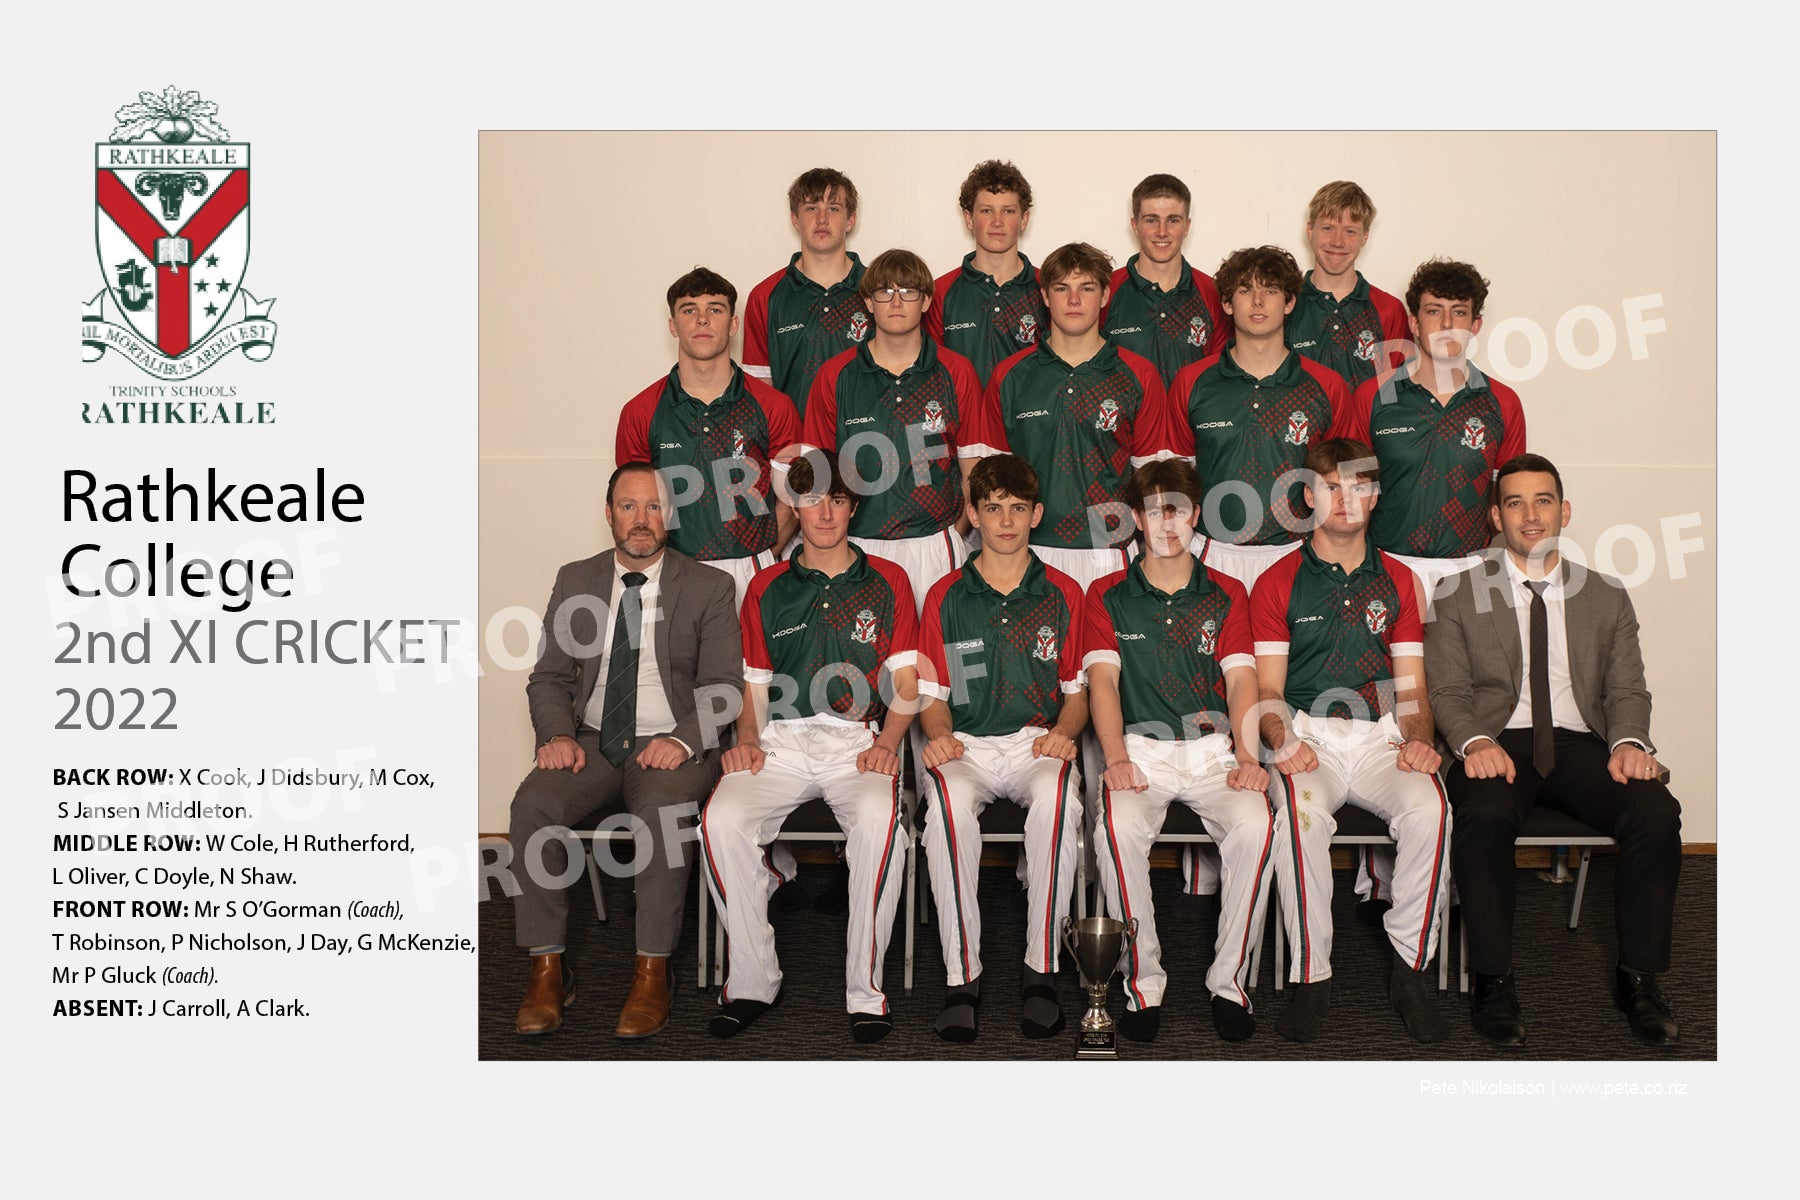 Cricket 2nd XI - Rathkeale College 2022